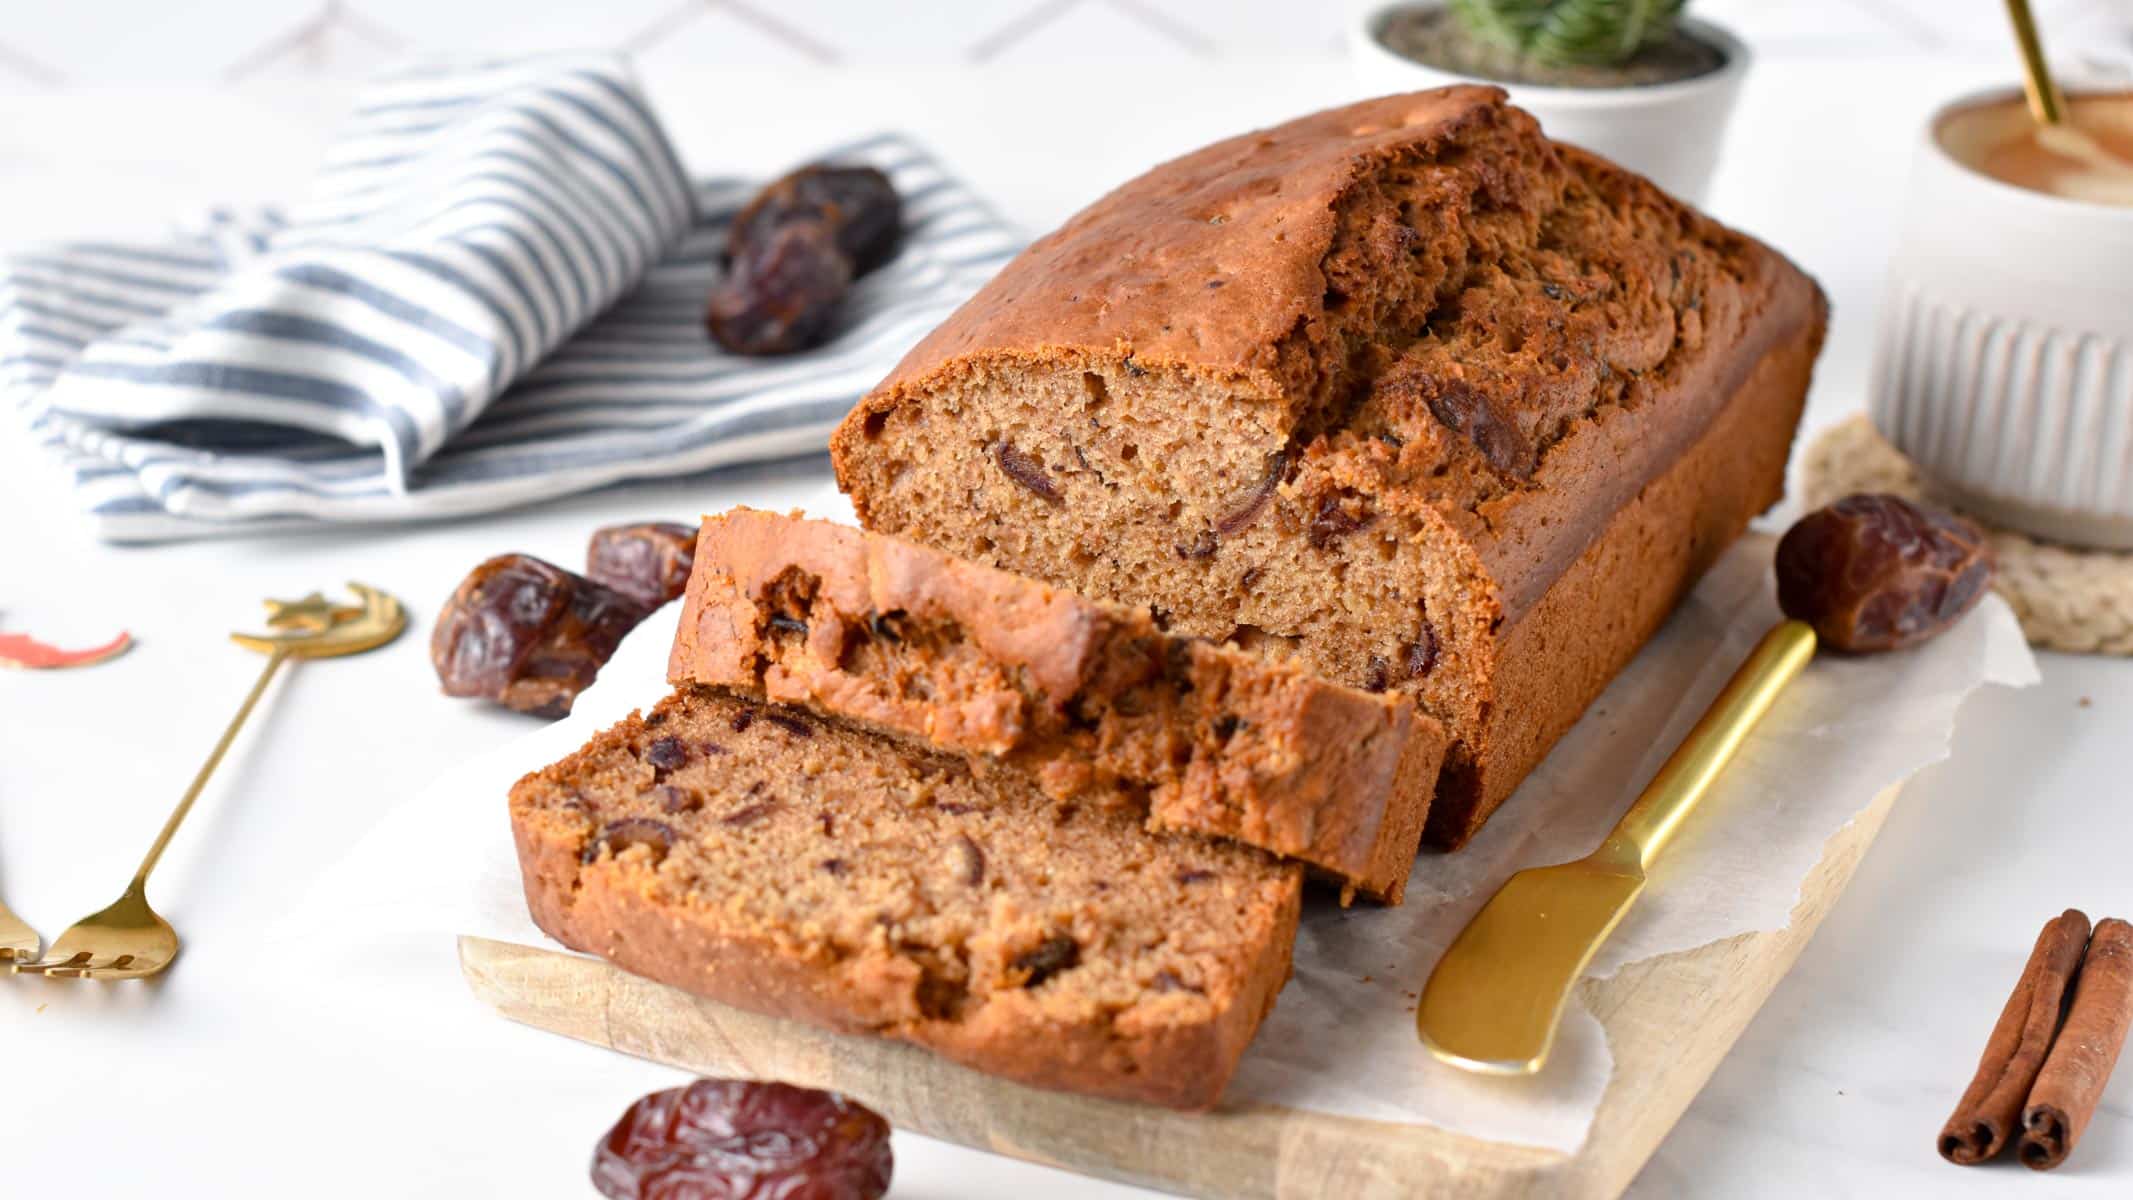 This Date Loaf is the most deliciously moist, sweet bread filled with sweet pieces of juicy dates. Plus, this date loaf recipe is also egg-free, dairy-free, and made healthier using wholesome ingredients.